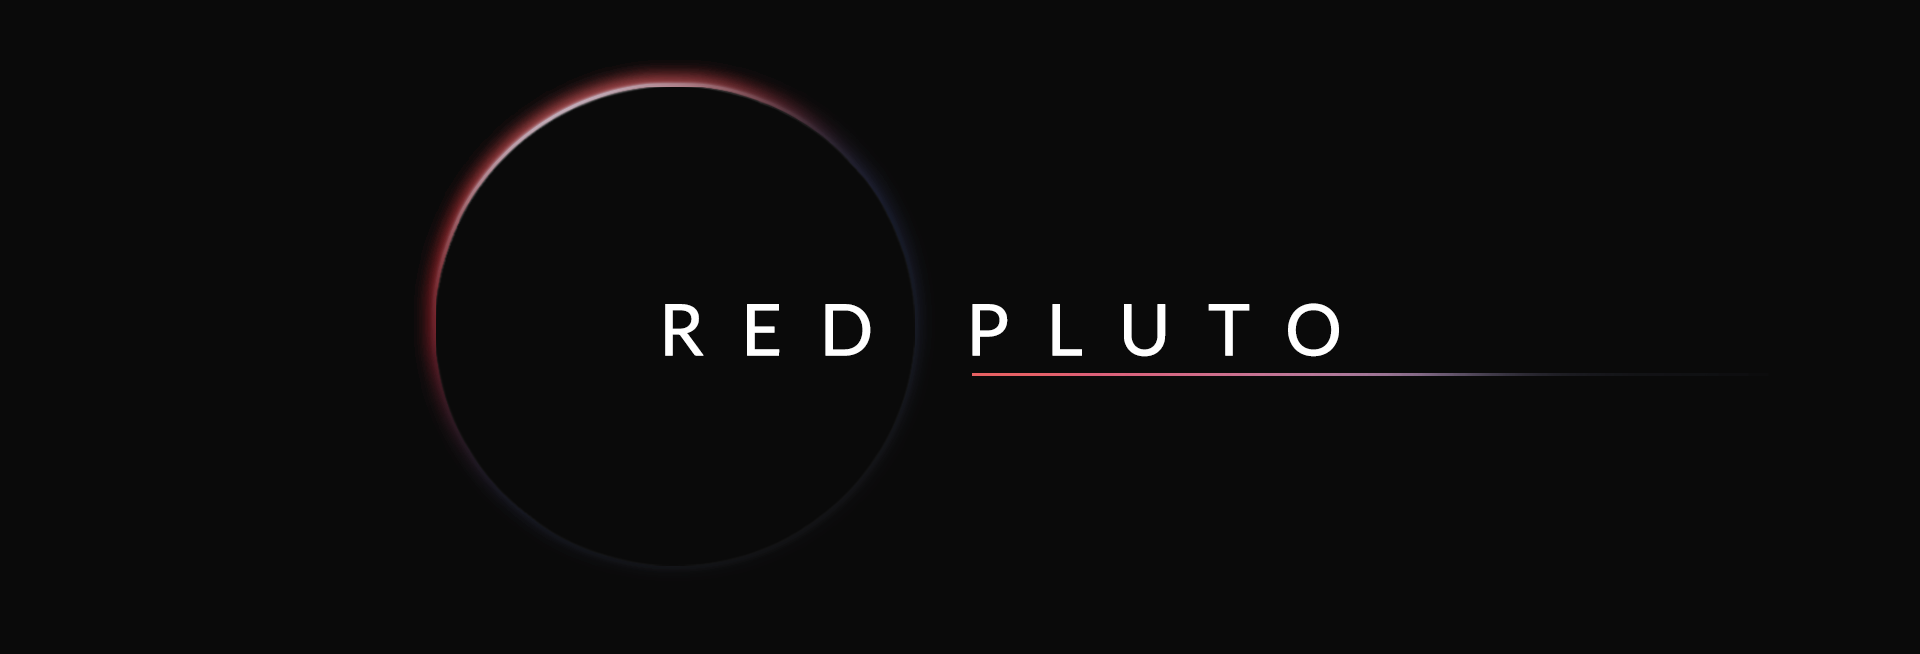 Red Pluto